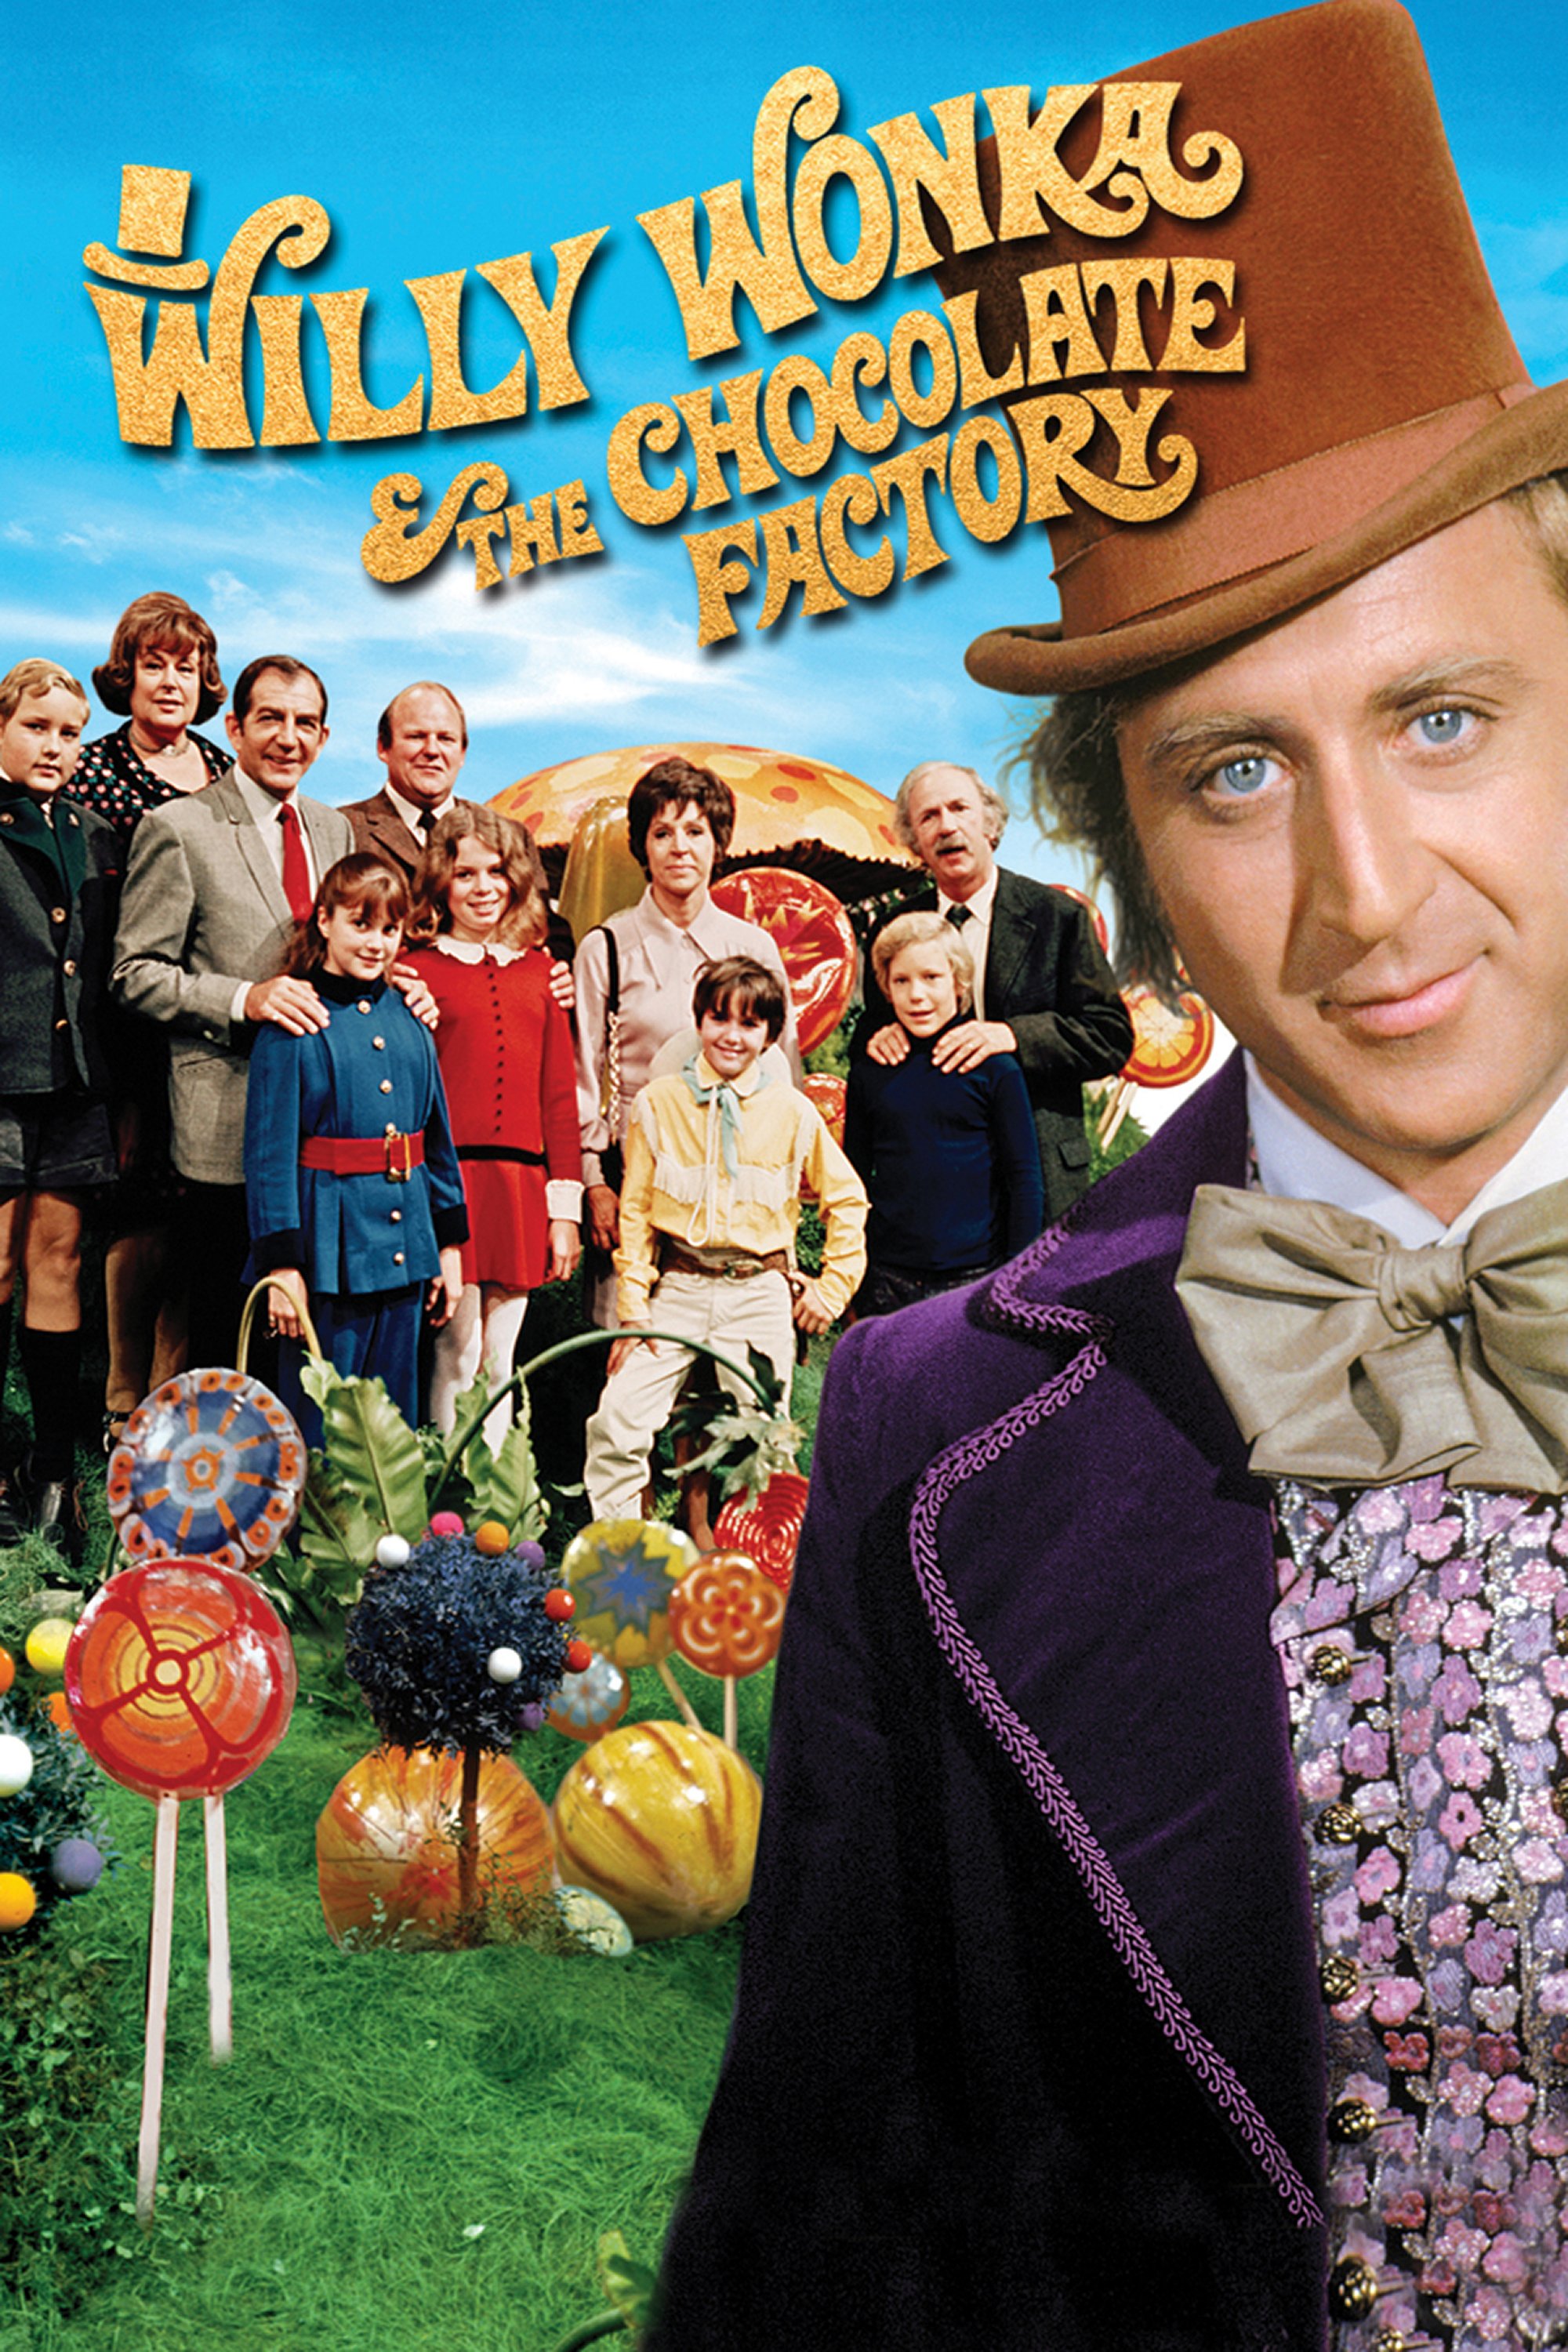 willy wonka's chocolate factory free tours